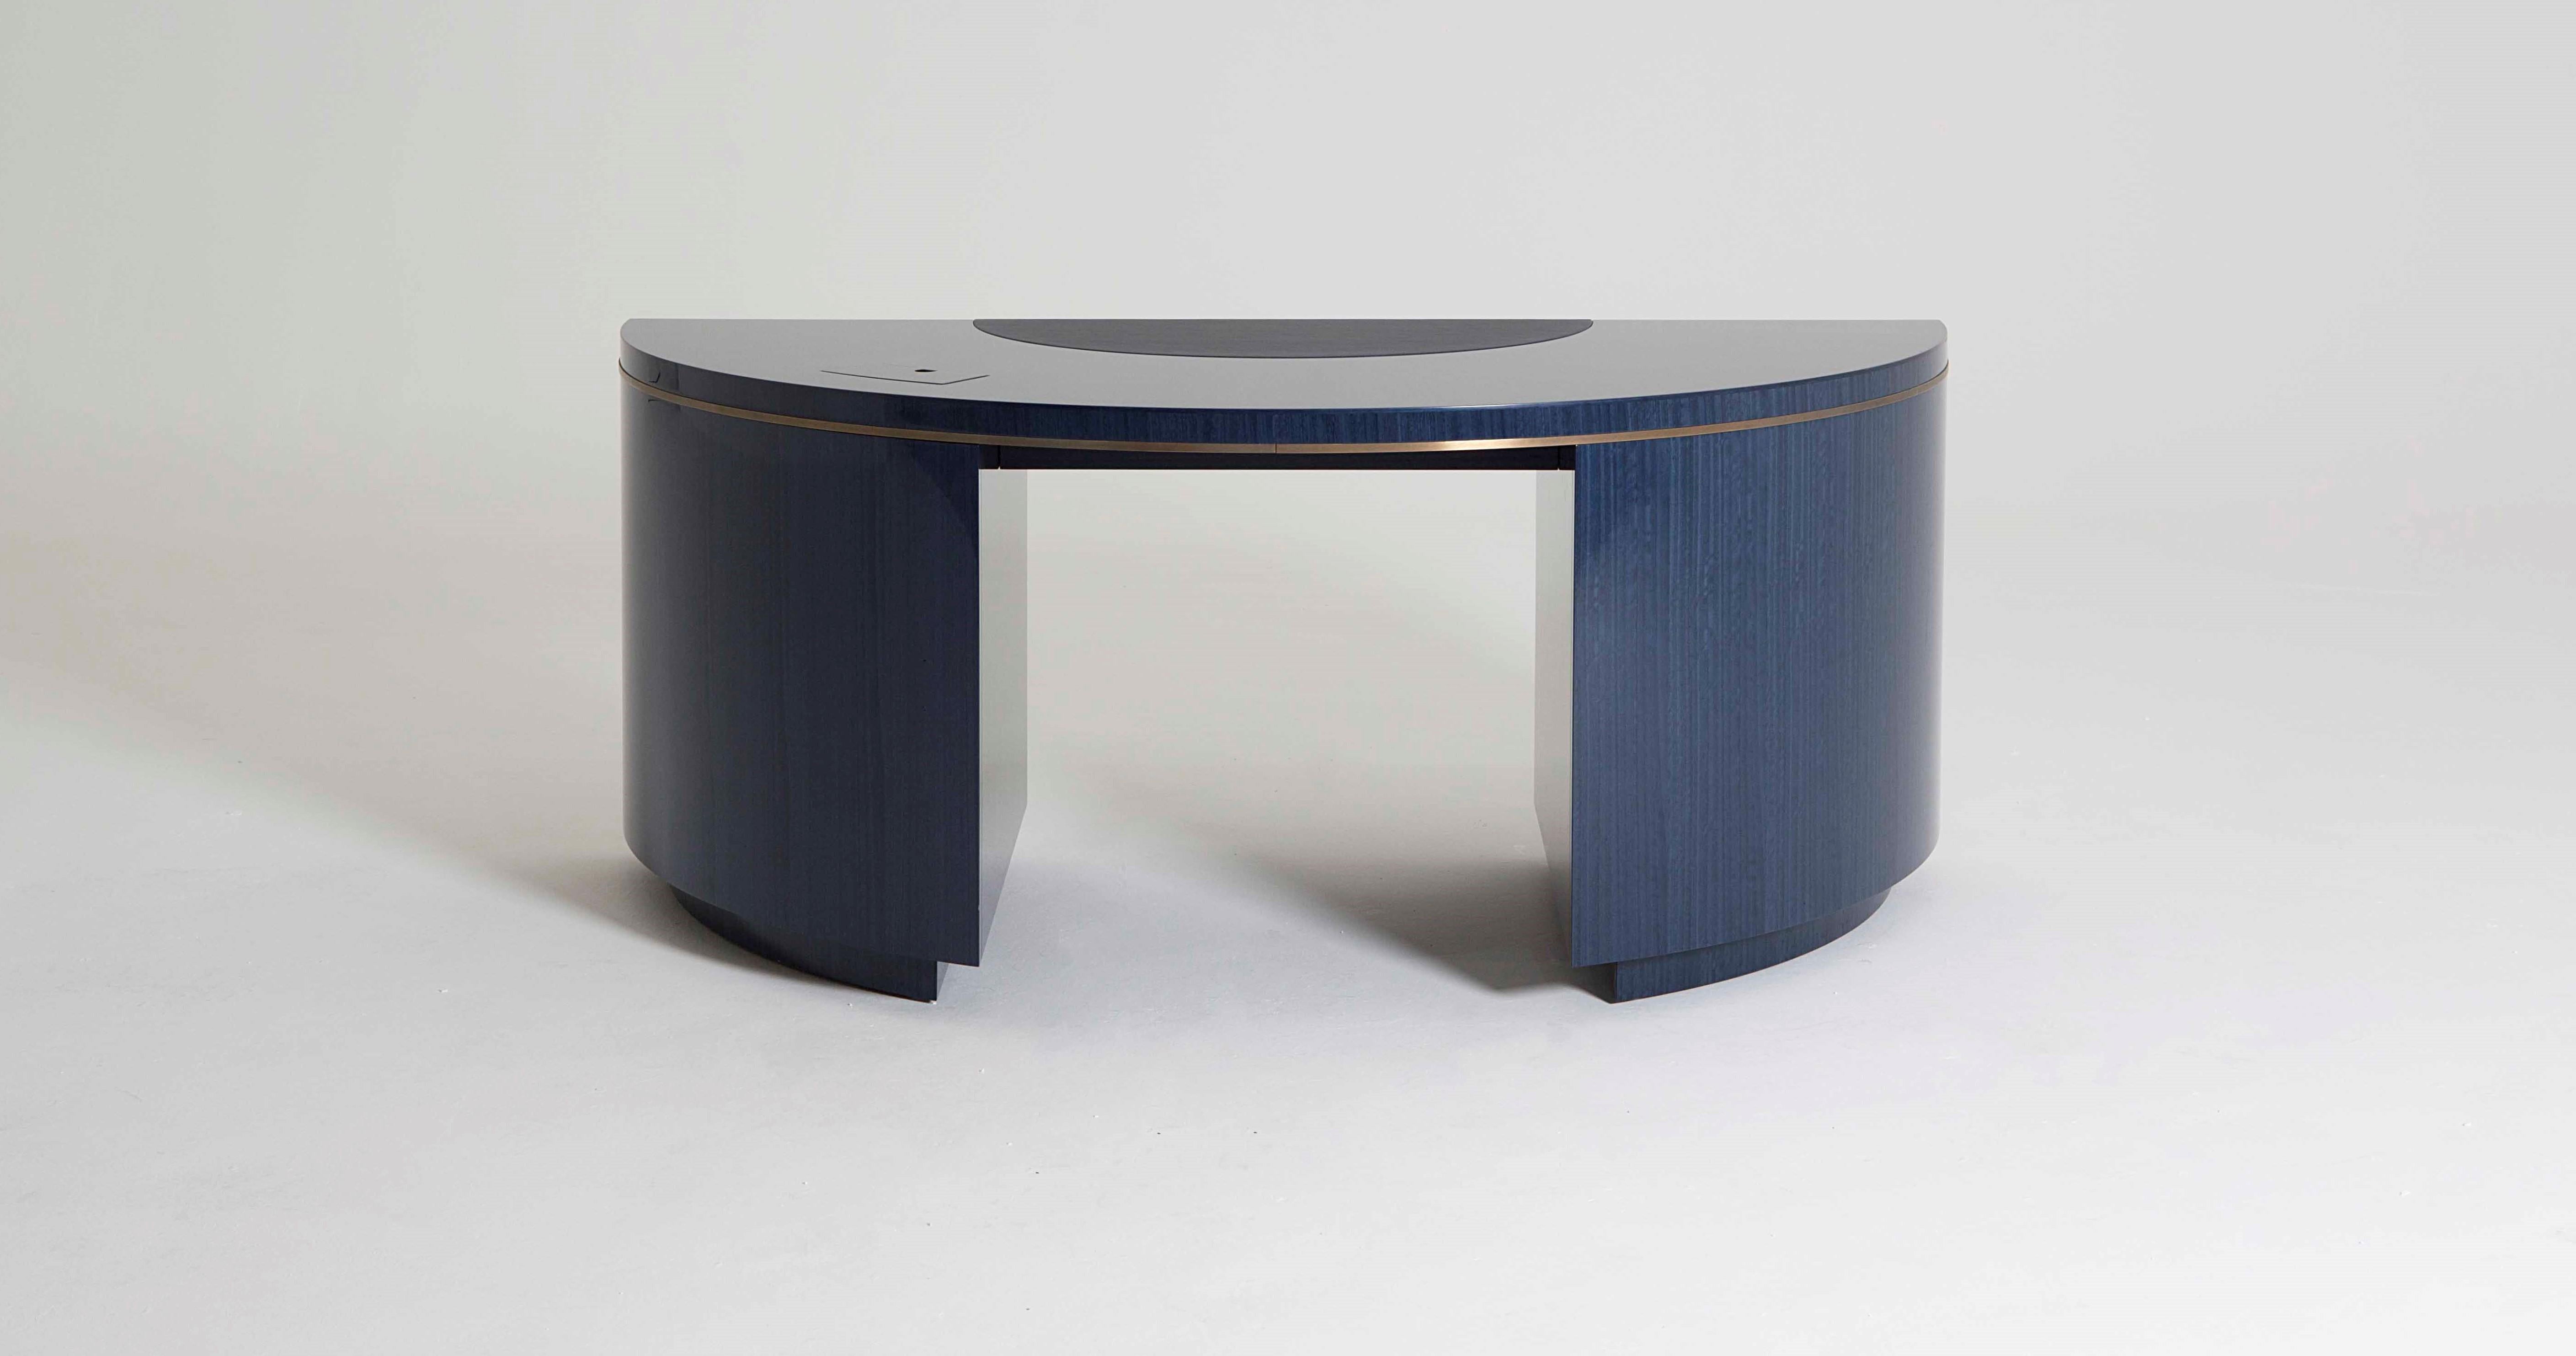 The table was inspired by the work of French designer Émile-Jacques Ruhlmann, one of the key figures in 1930s Art Deco. His designs are the epitome of sleek and sophisticated, using expensive and exotic materials combined with an impeccable